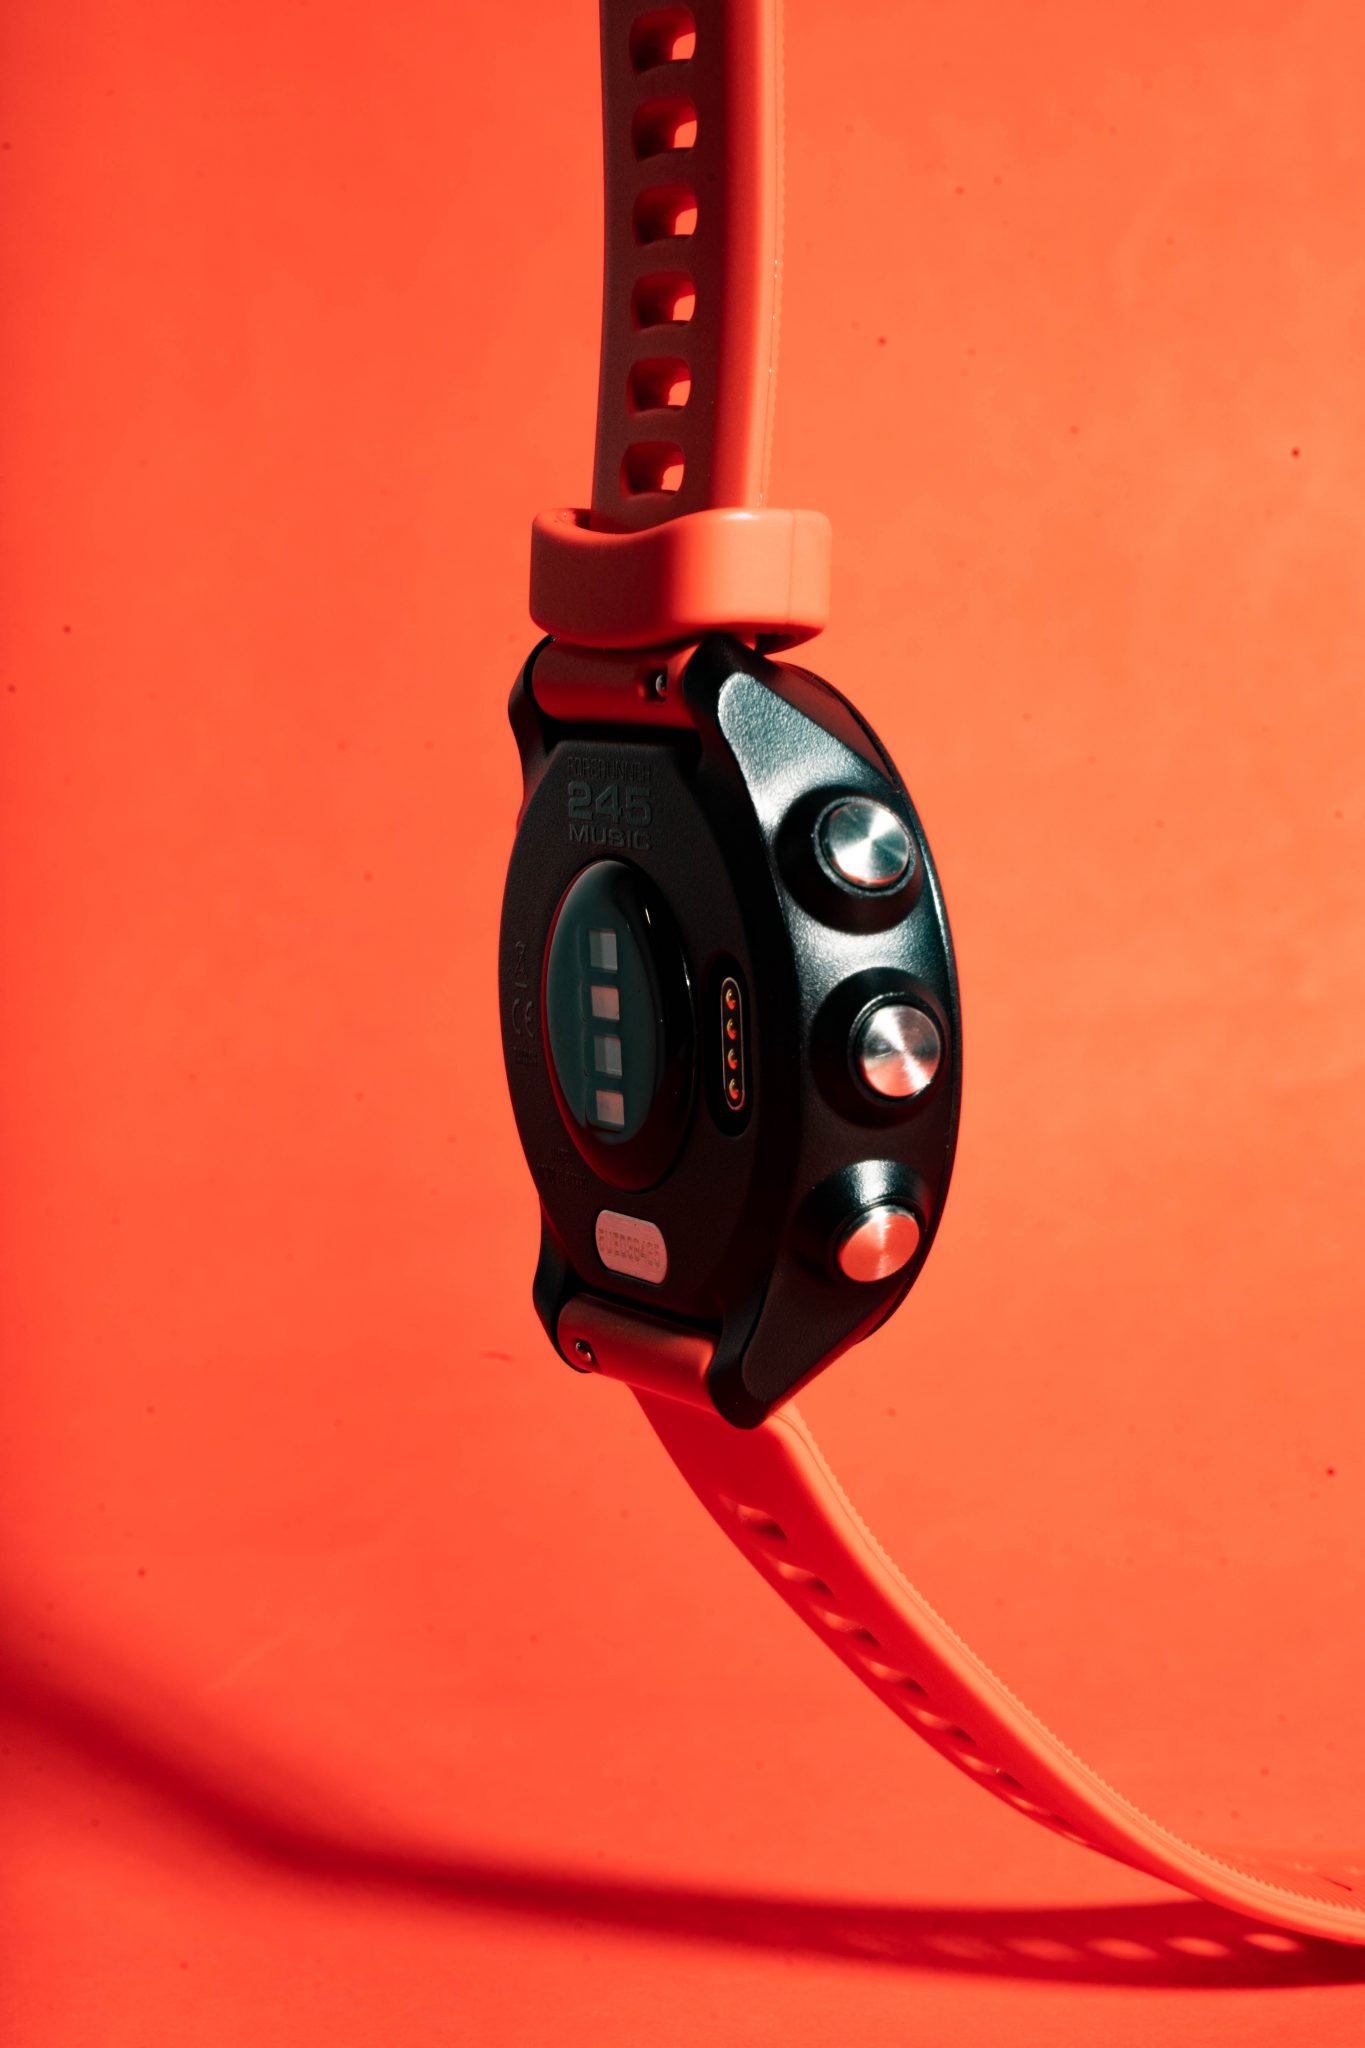 The Garmin Forerunner 245 Music is a serious piece of equipment that is capable of tracking your every twitch and move